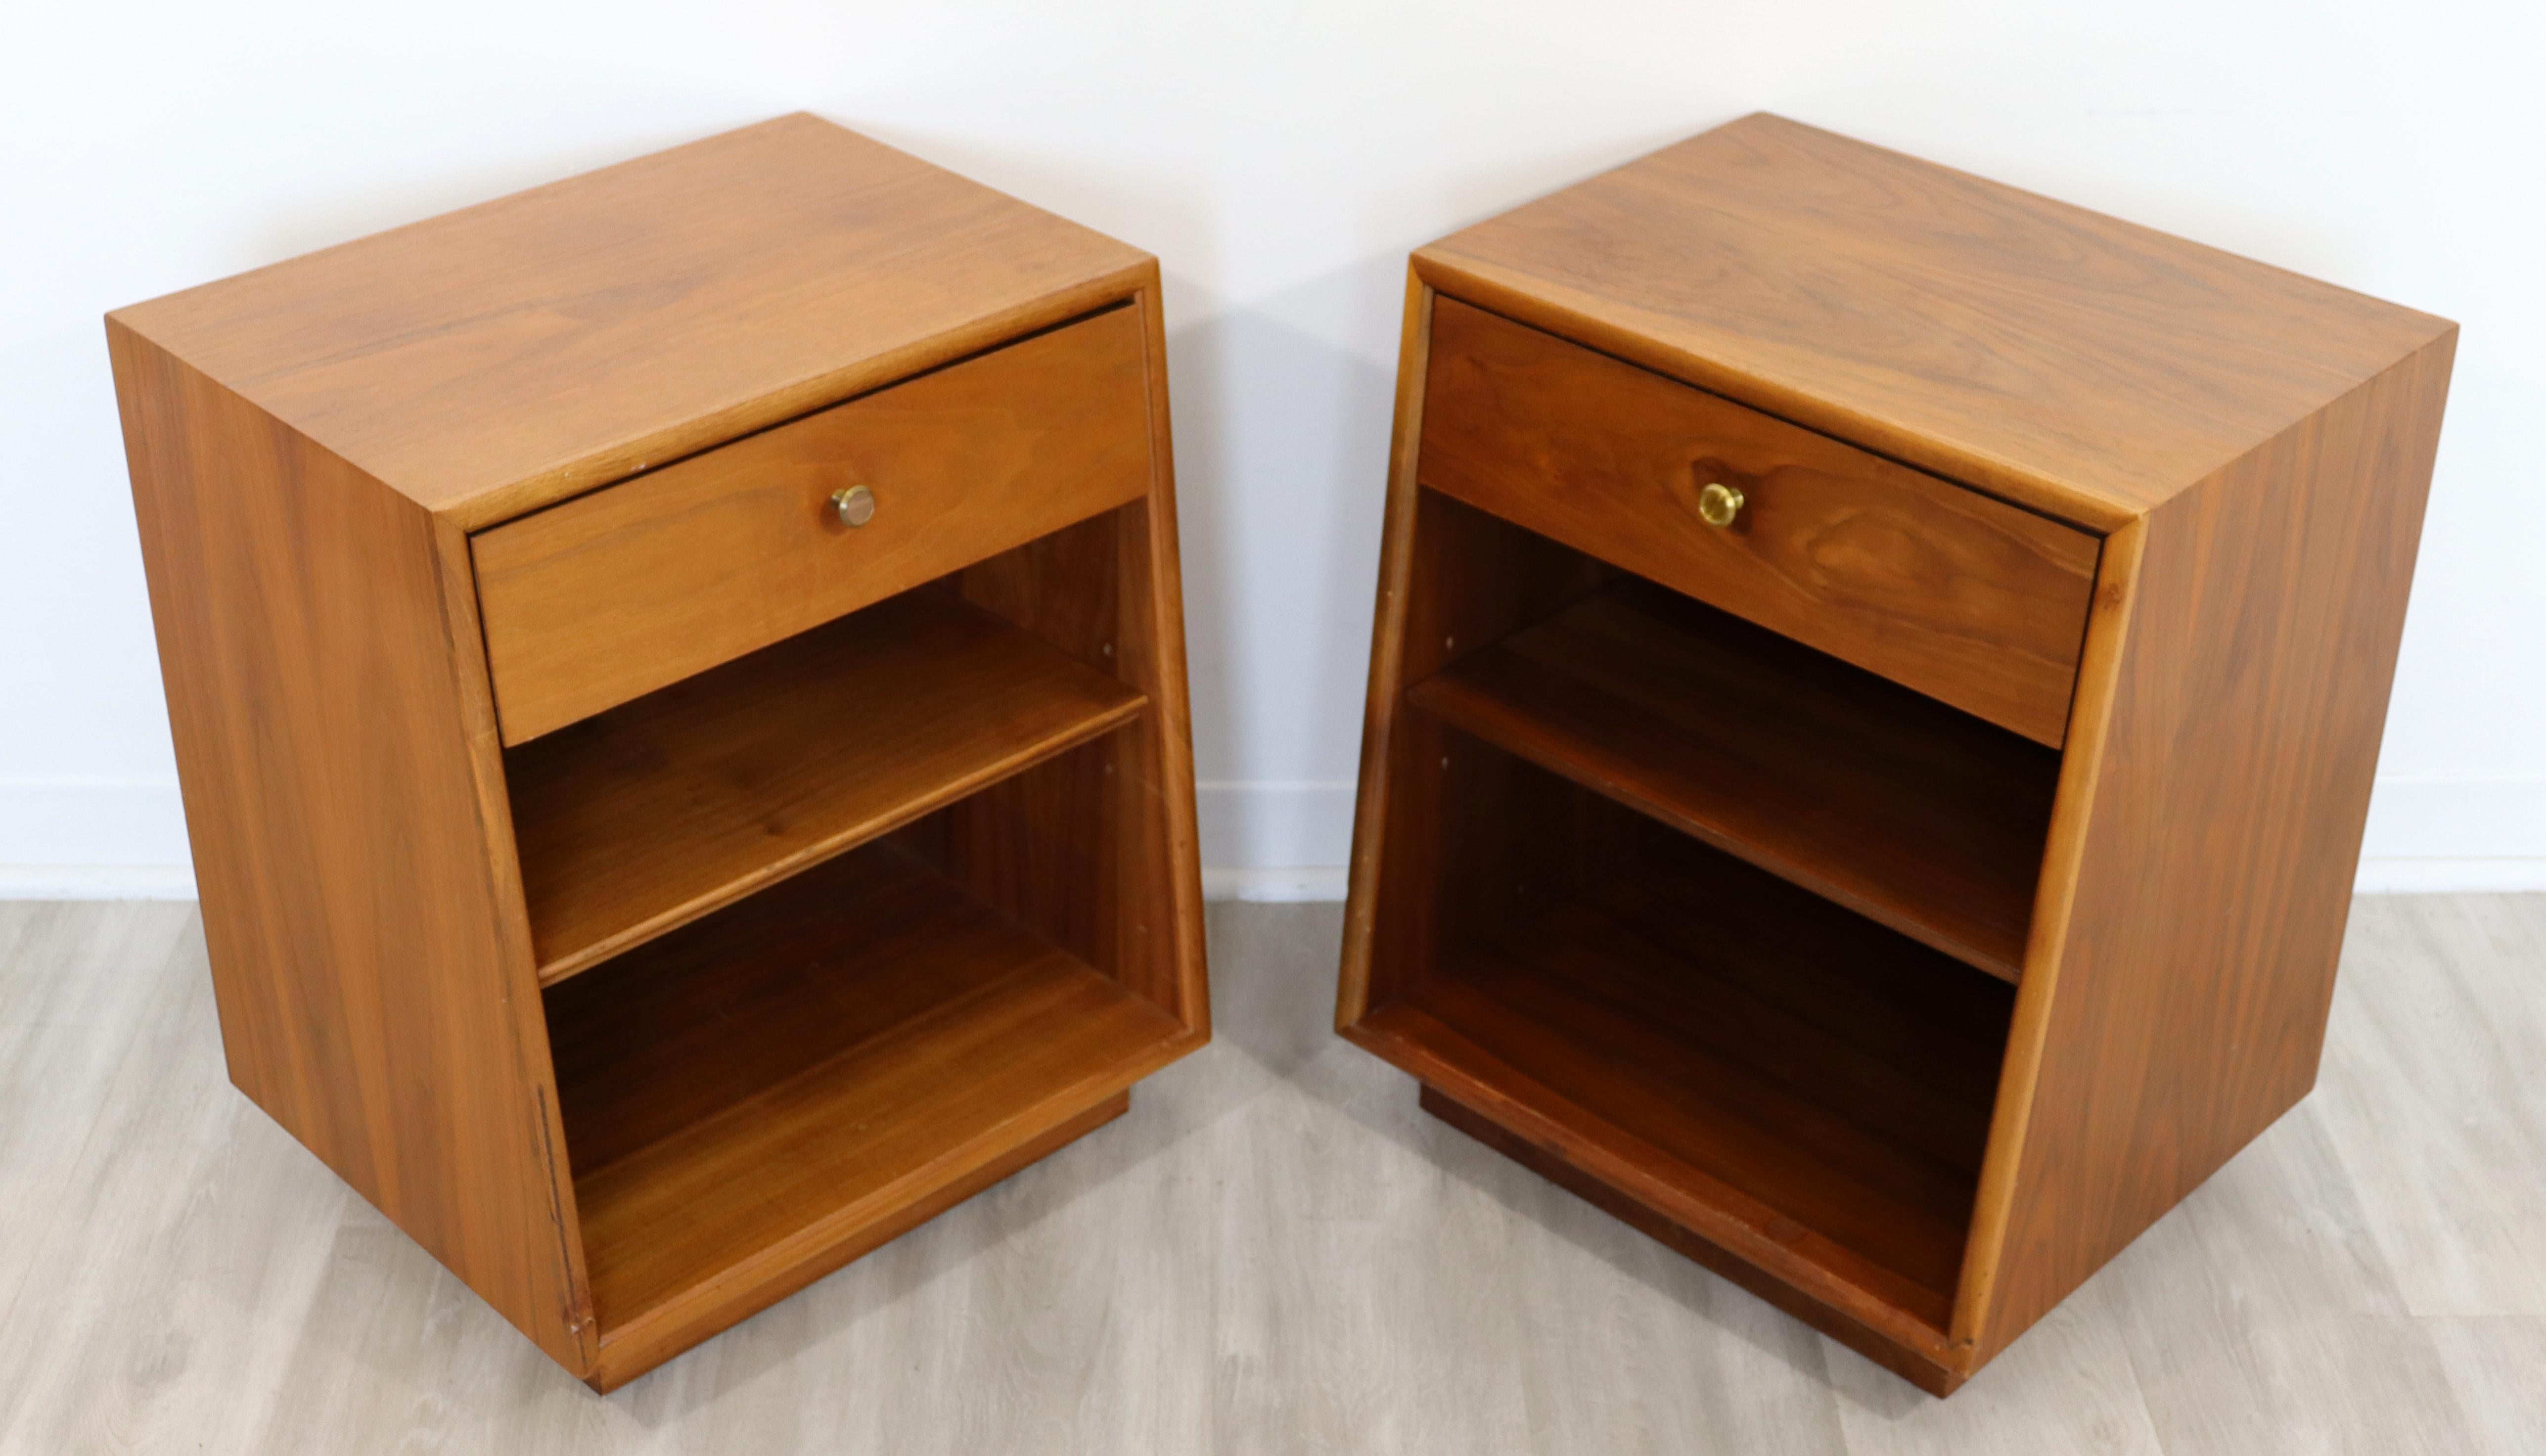 For your consideration is a delightful pair of Drexel side tables or nightstands, with one drawer and one shelf each, circa the 1960s. In excellent vintage condition. The dimensions are 20